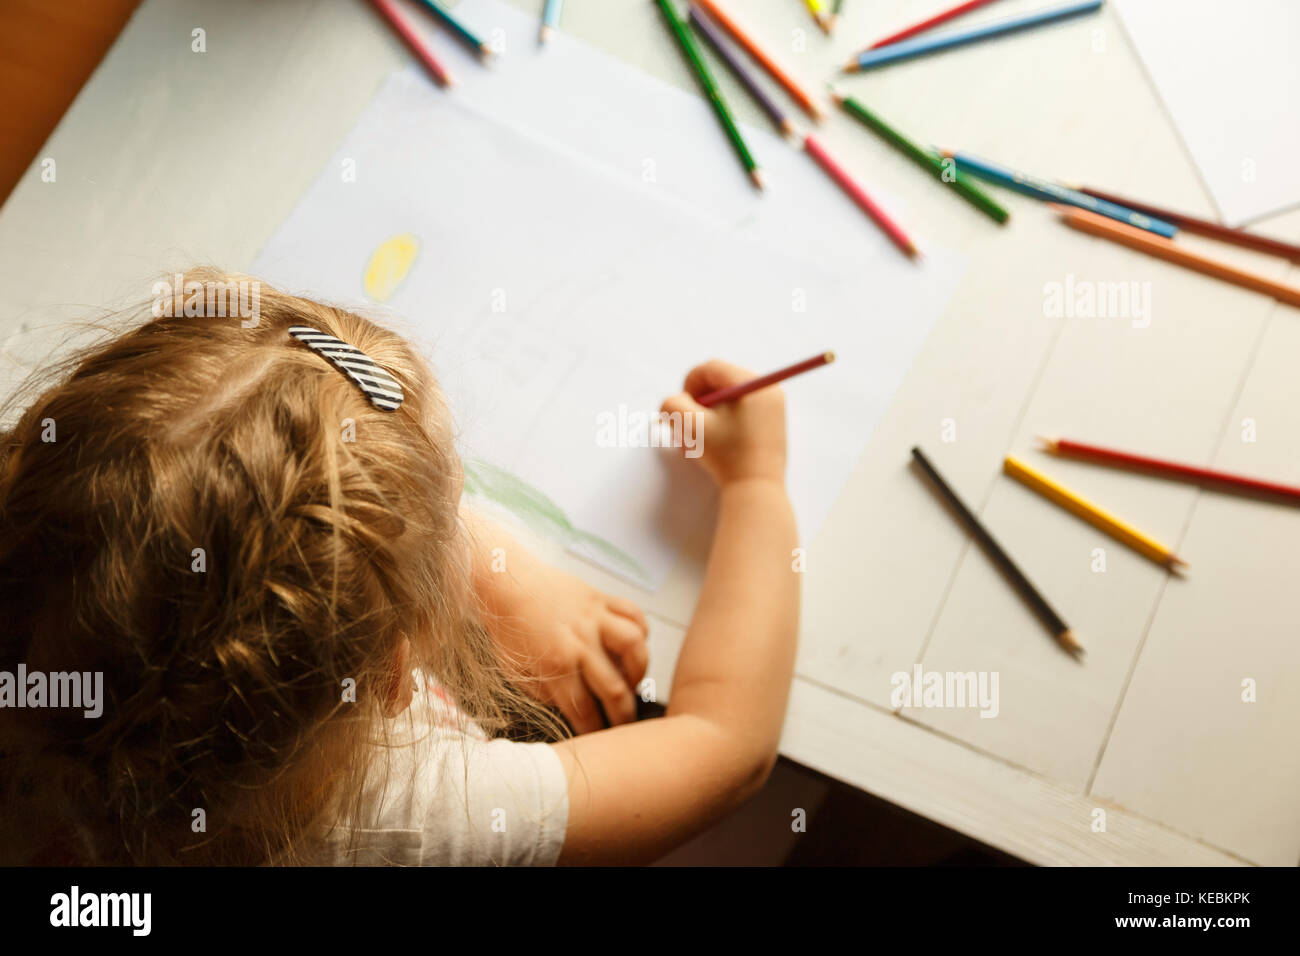 How to develop the creative abilities of your child. Stock Photo